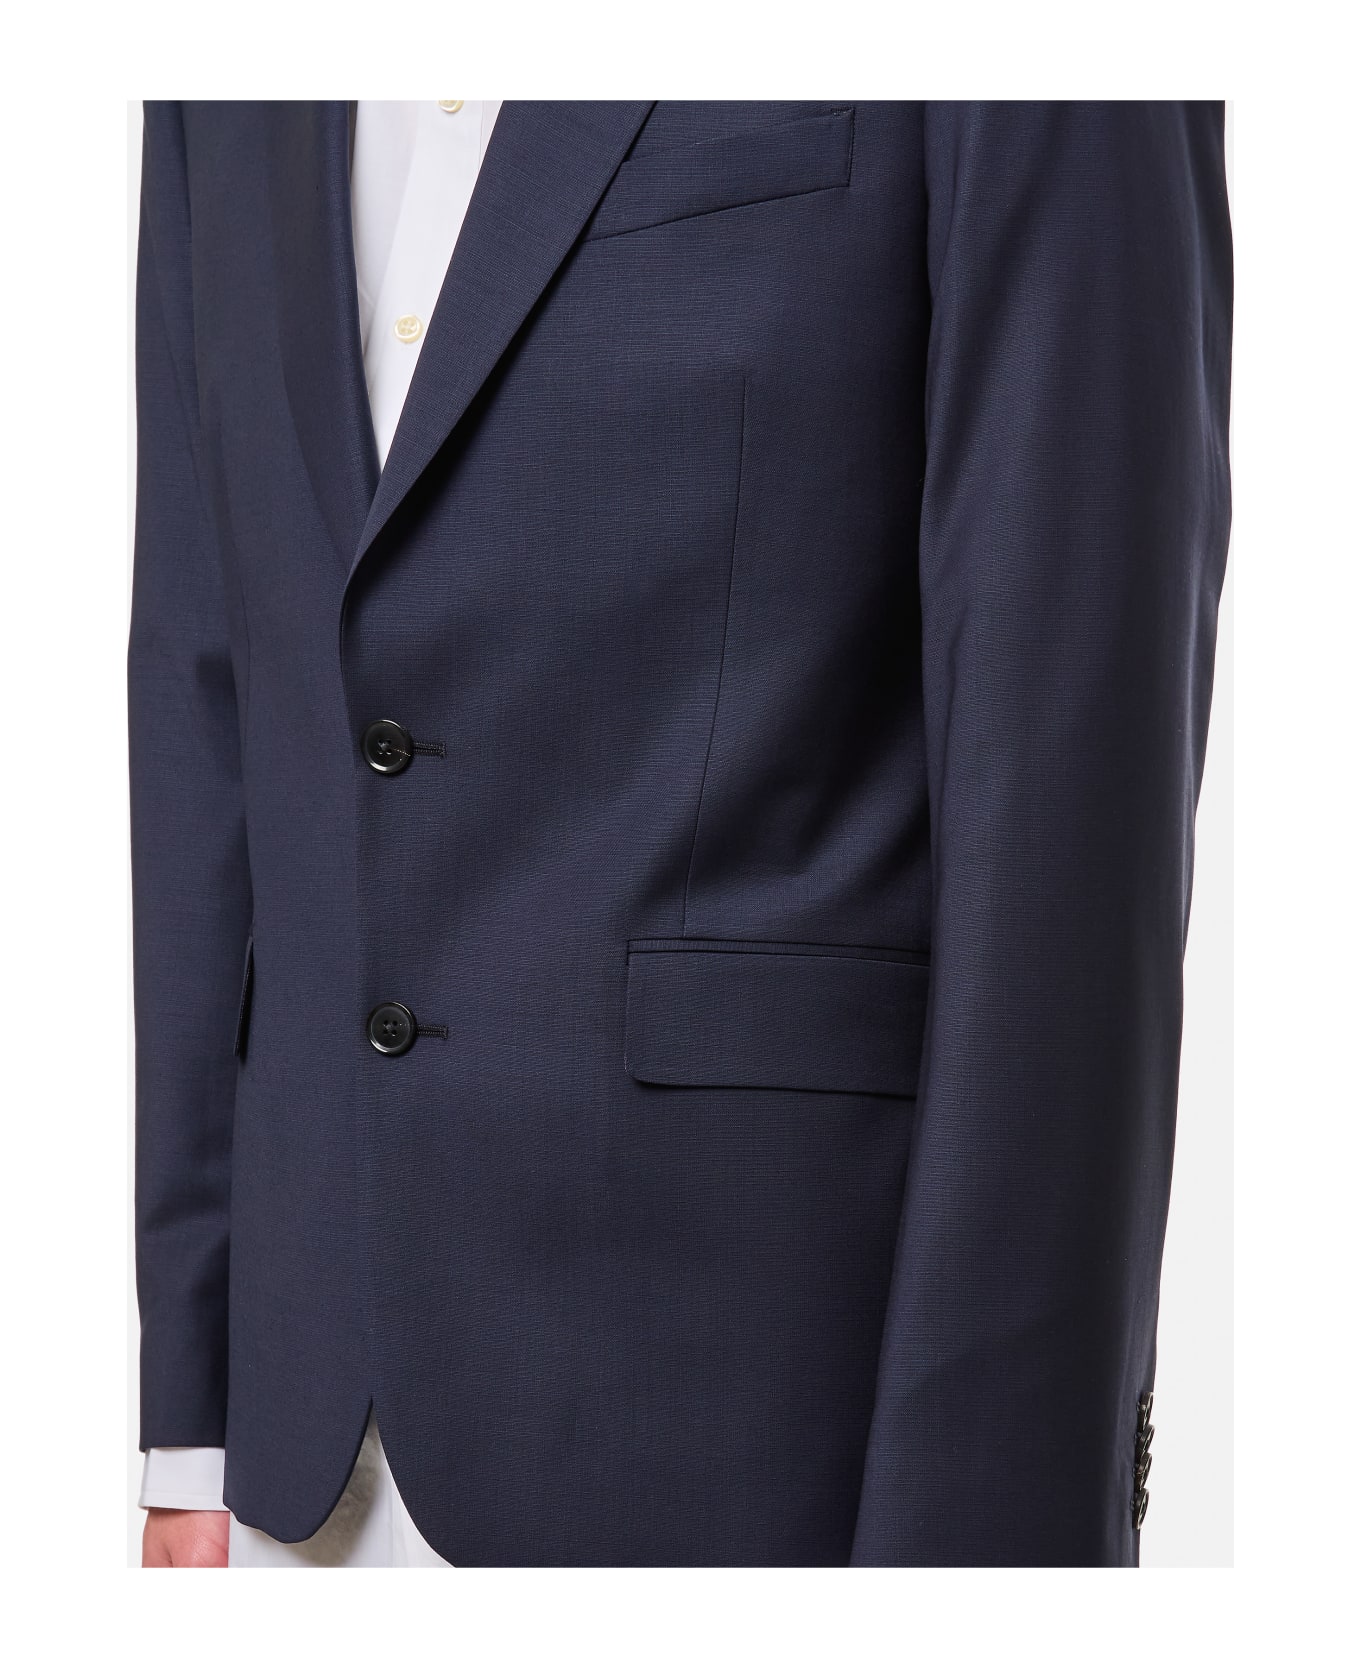 Paul Smith Tailored Fit Jacket - Blue